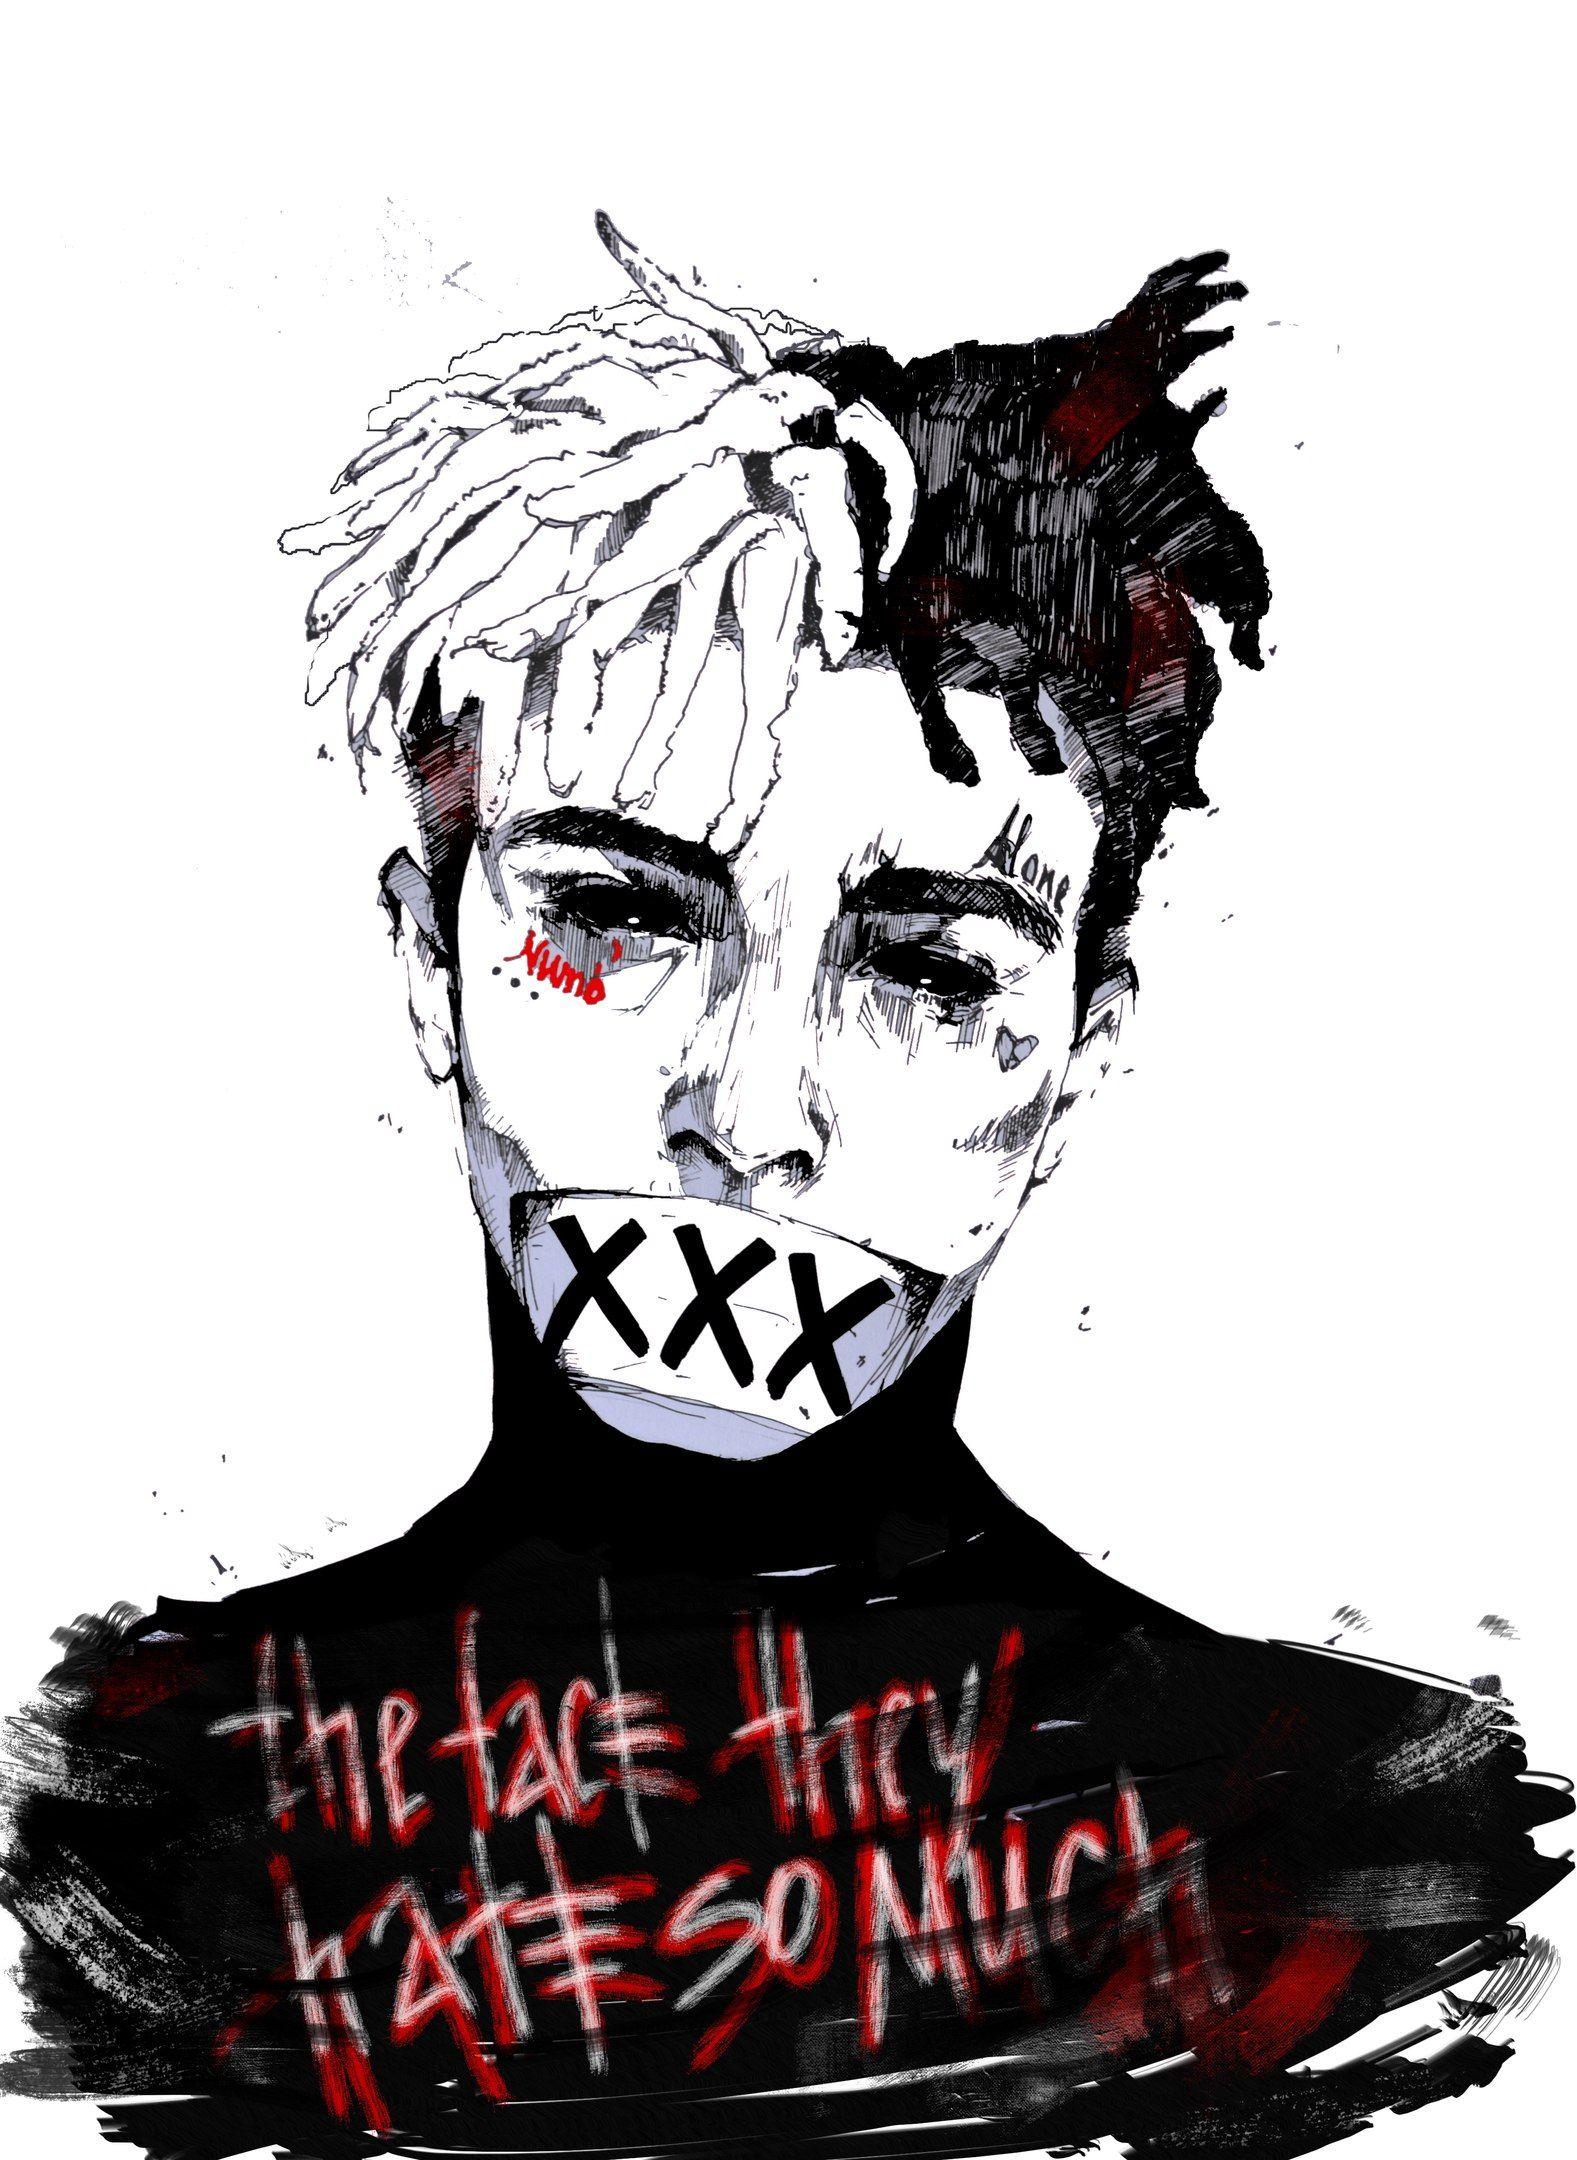 XXXTENTACION #Arts this have own style, sharp but cool. Art